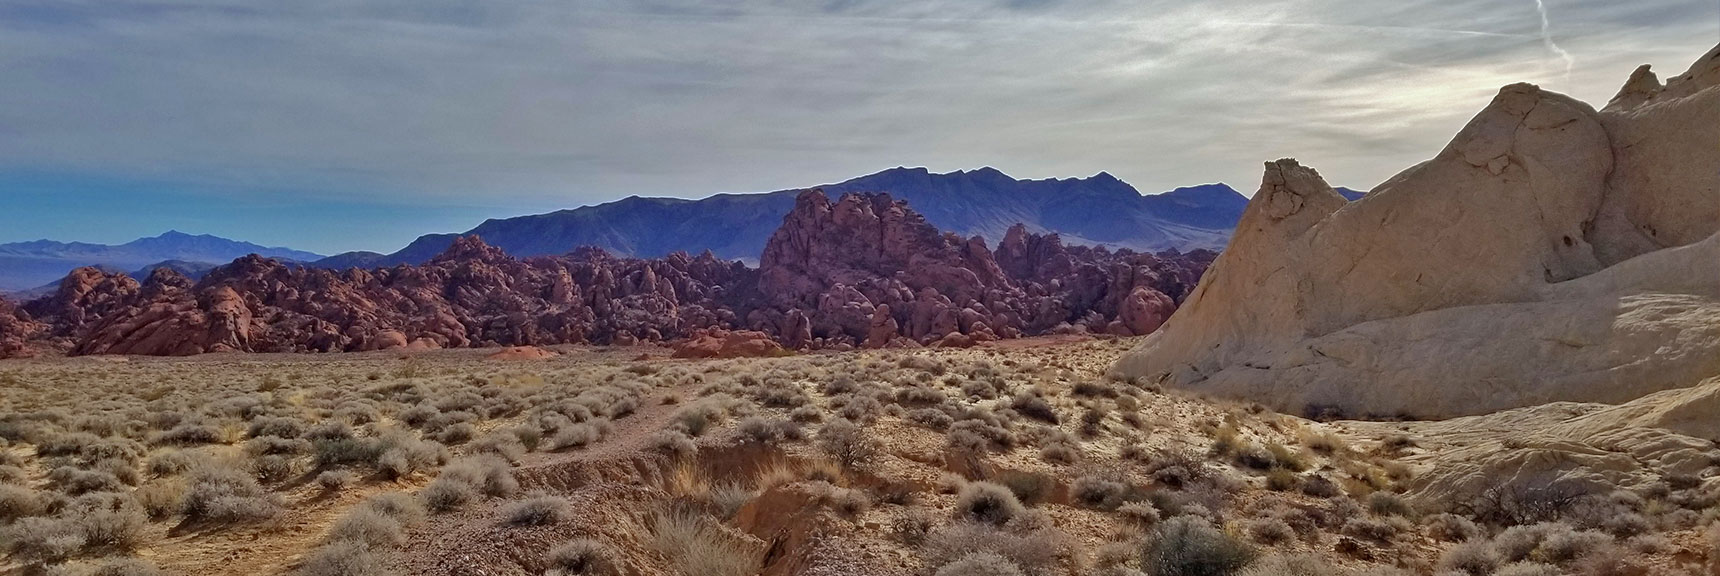 Looking Back on Fire Canyon from Silica Dome and Fire Canyon in Valley of Fire State Park, Nevada